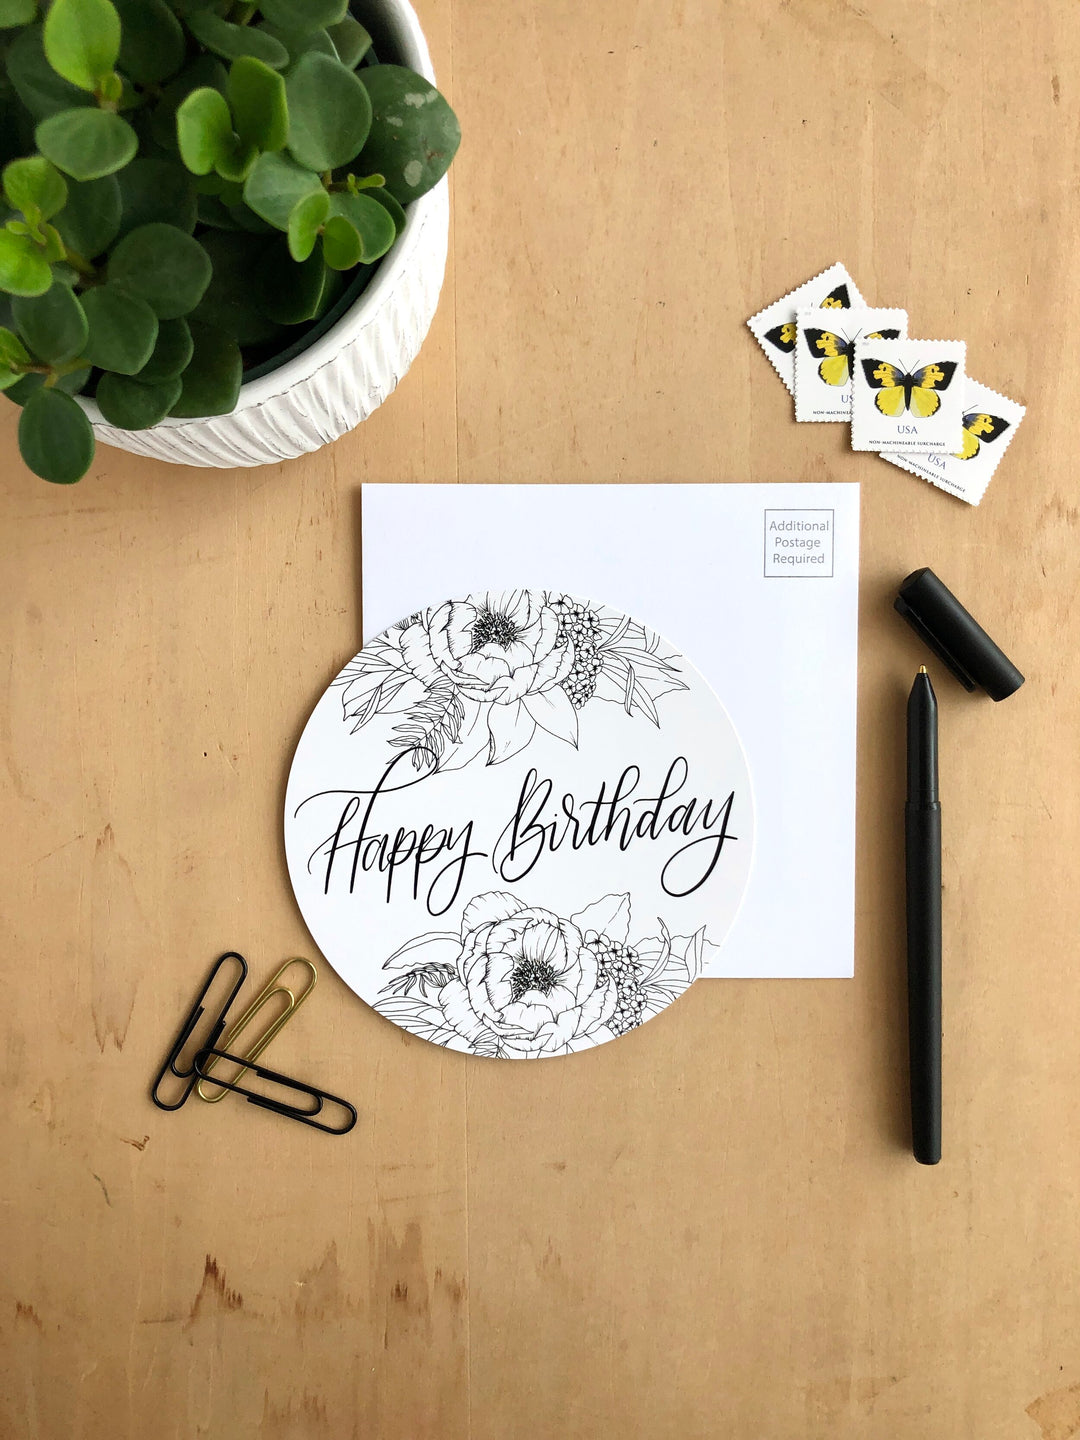 A black and white Happy Birthday Greeting card howcasing illustrations of flowers this floral greeting card captures the essence of a blossoming floral symbolizing growth and the beauty found in relationships.